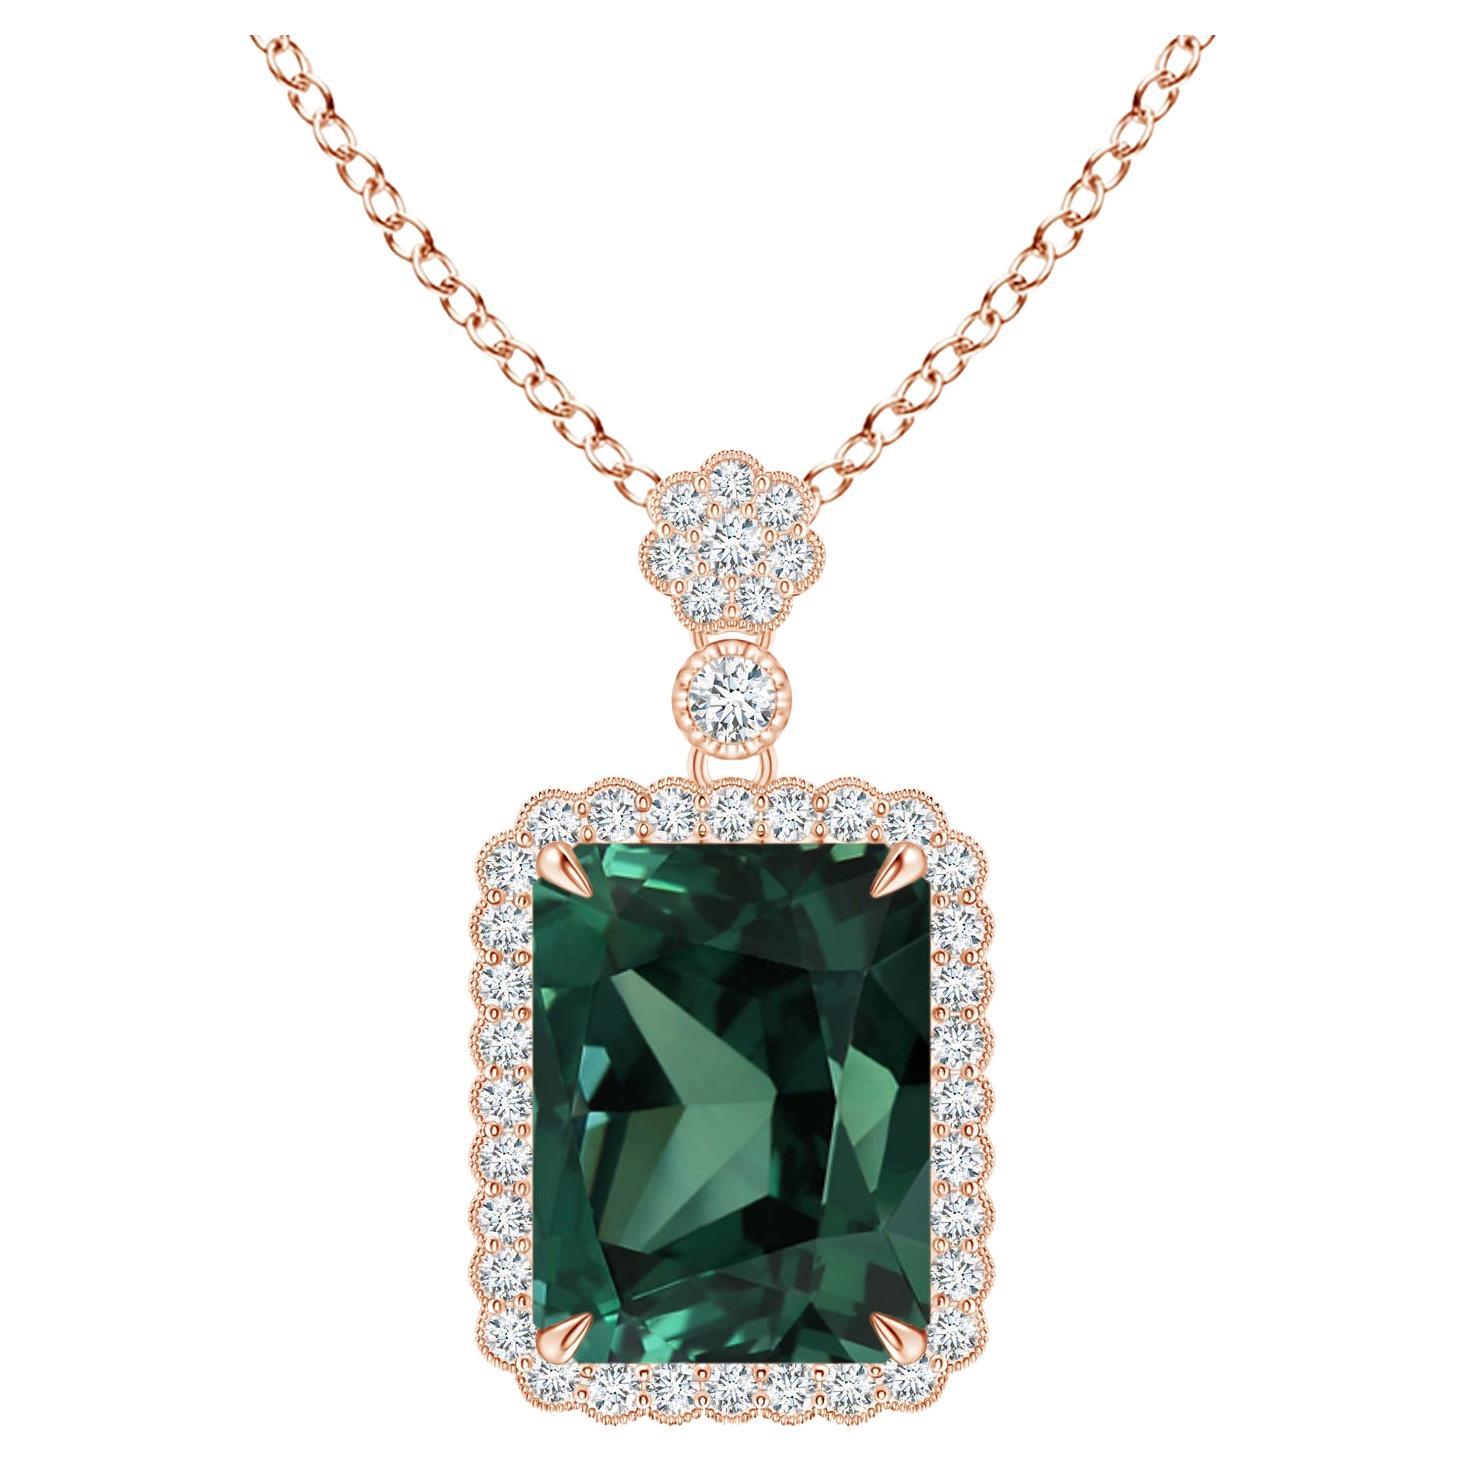 Angara Gia Certified Natural Green Sapphire 'Teal' Rose Gold Pendant Necklace